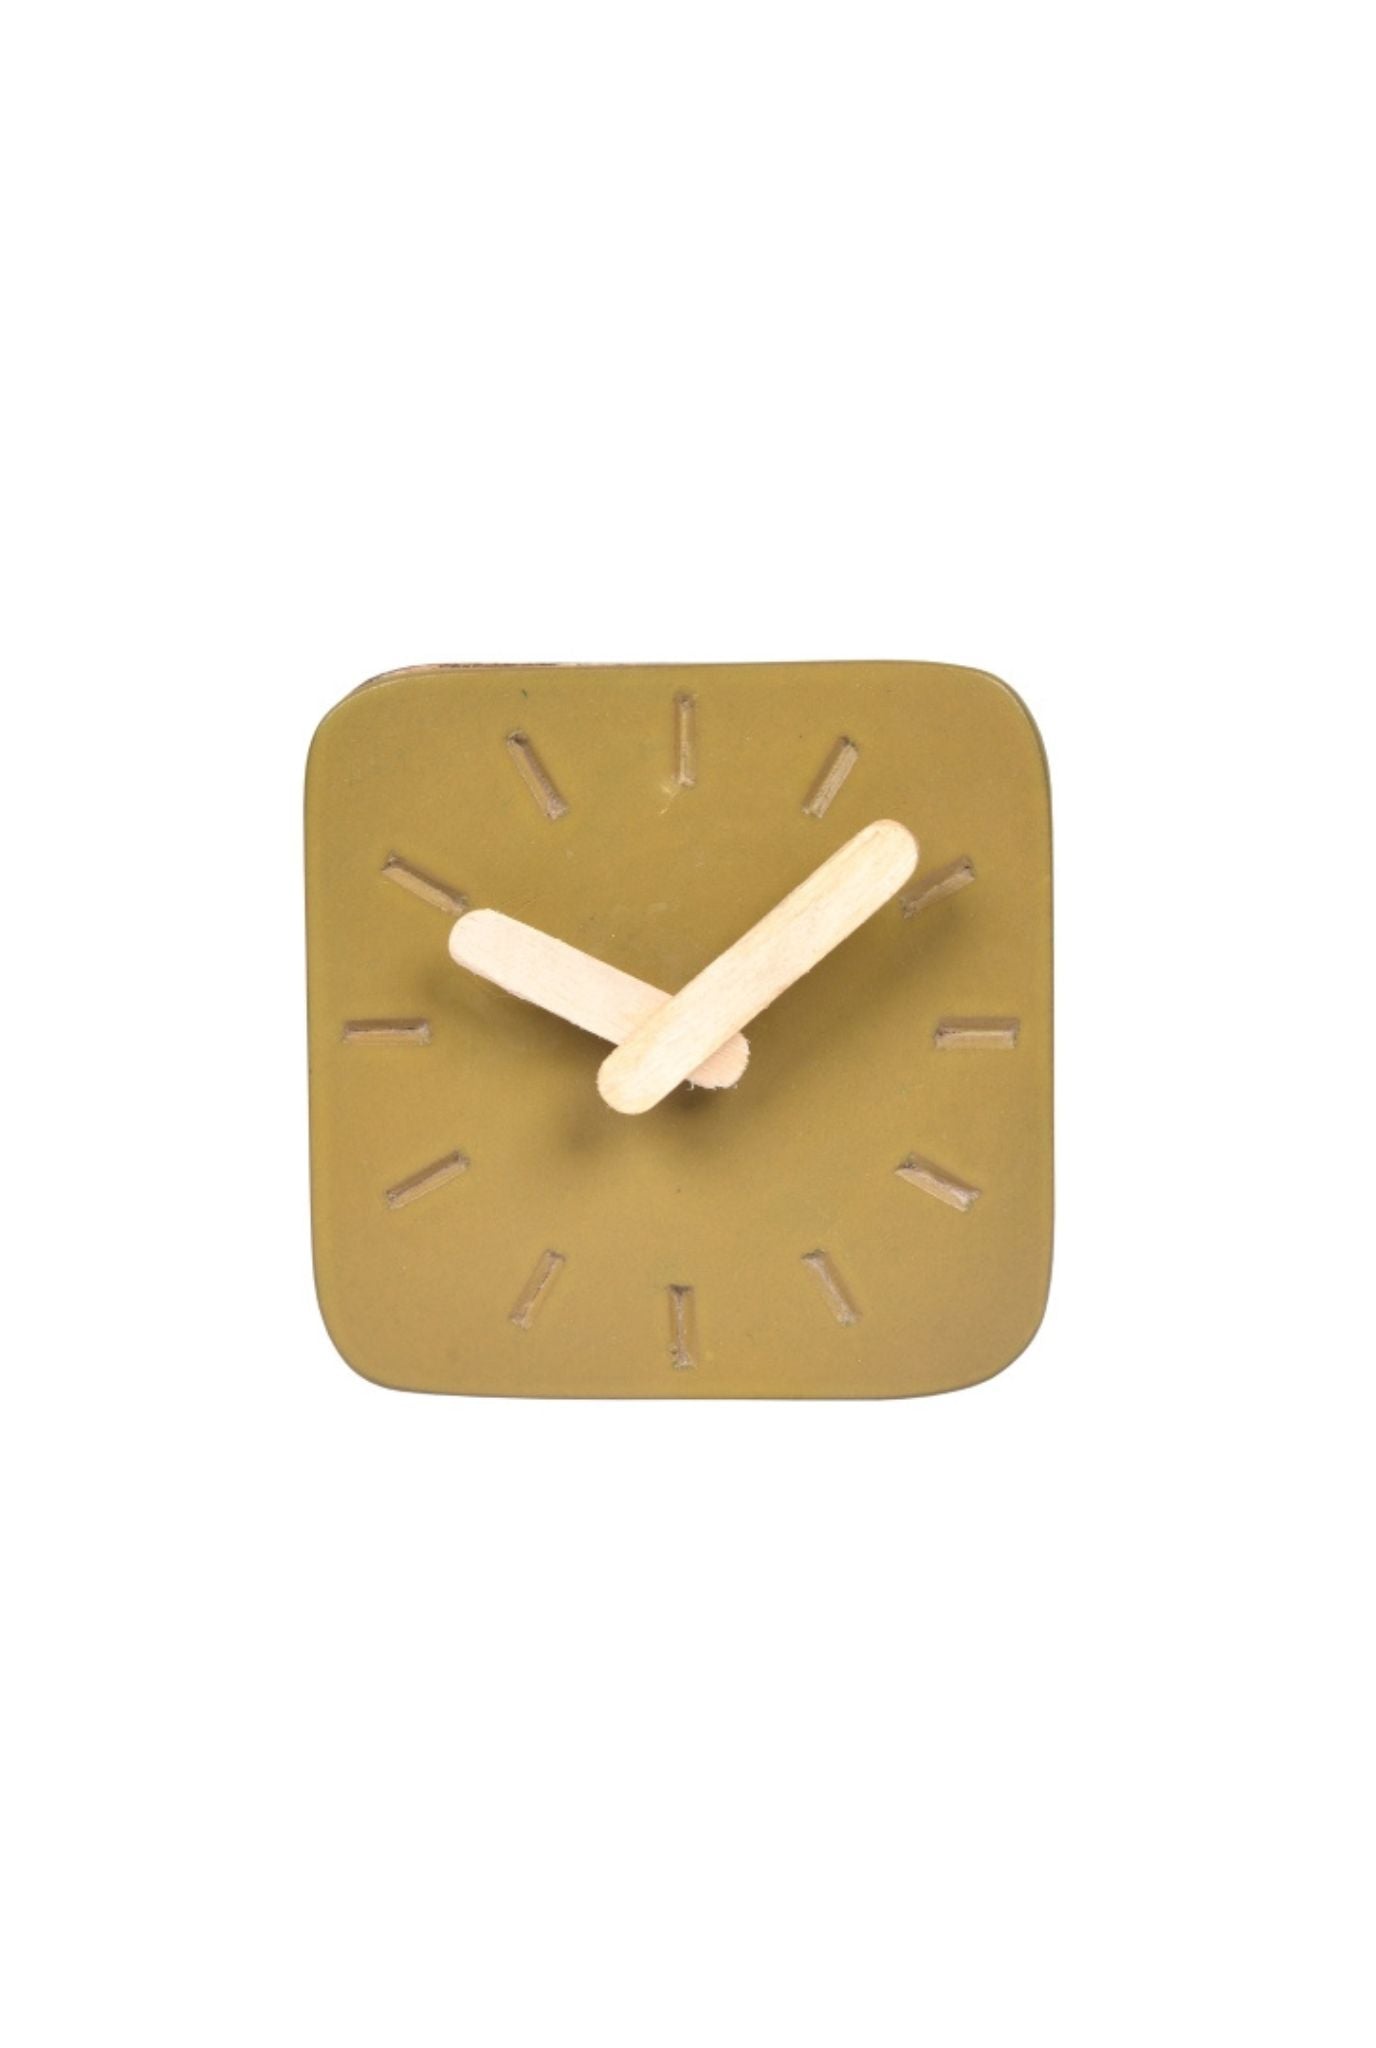 Abuja Table Clock   (SHIPPING ONLY IN INDIA)